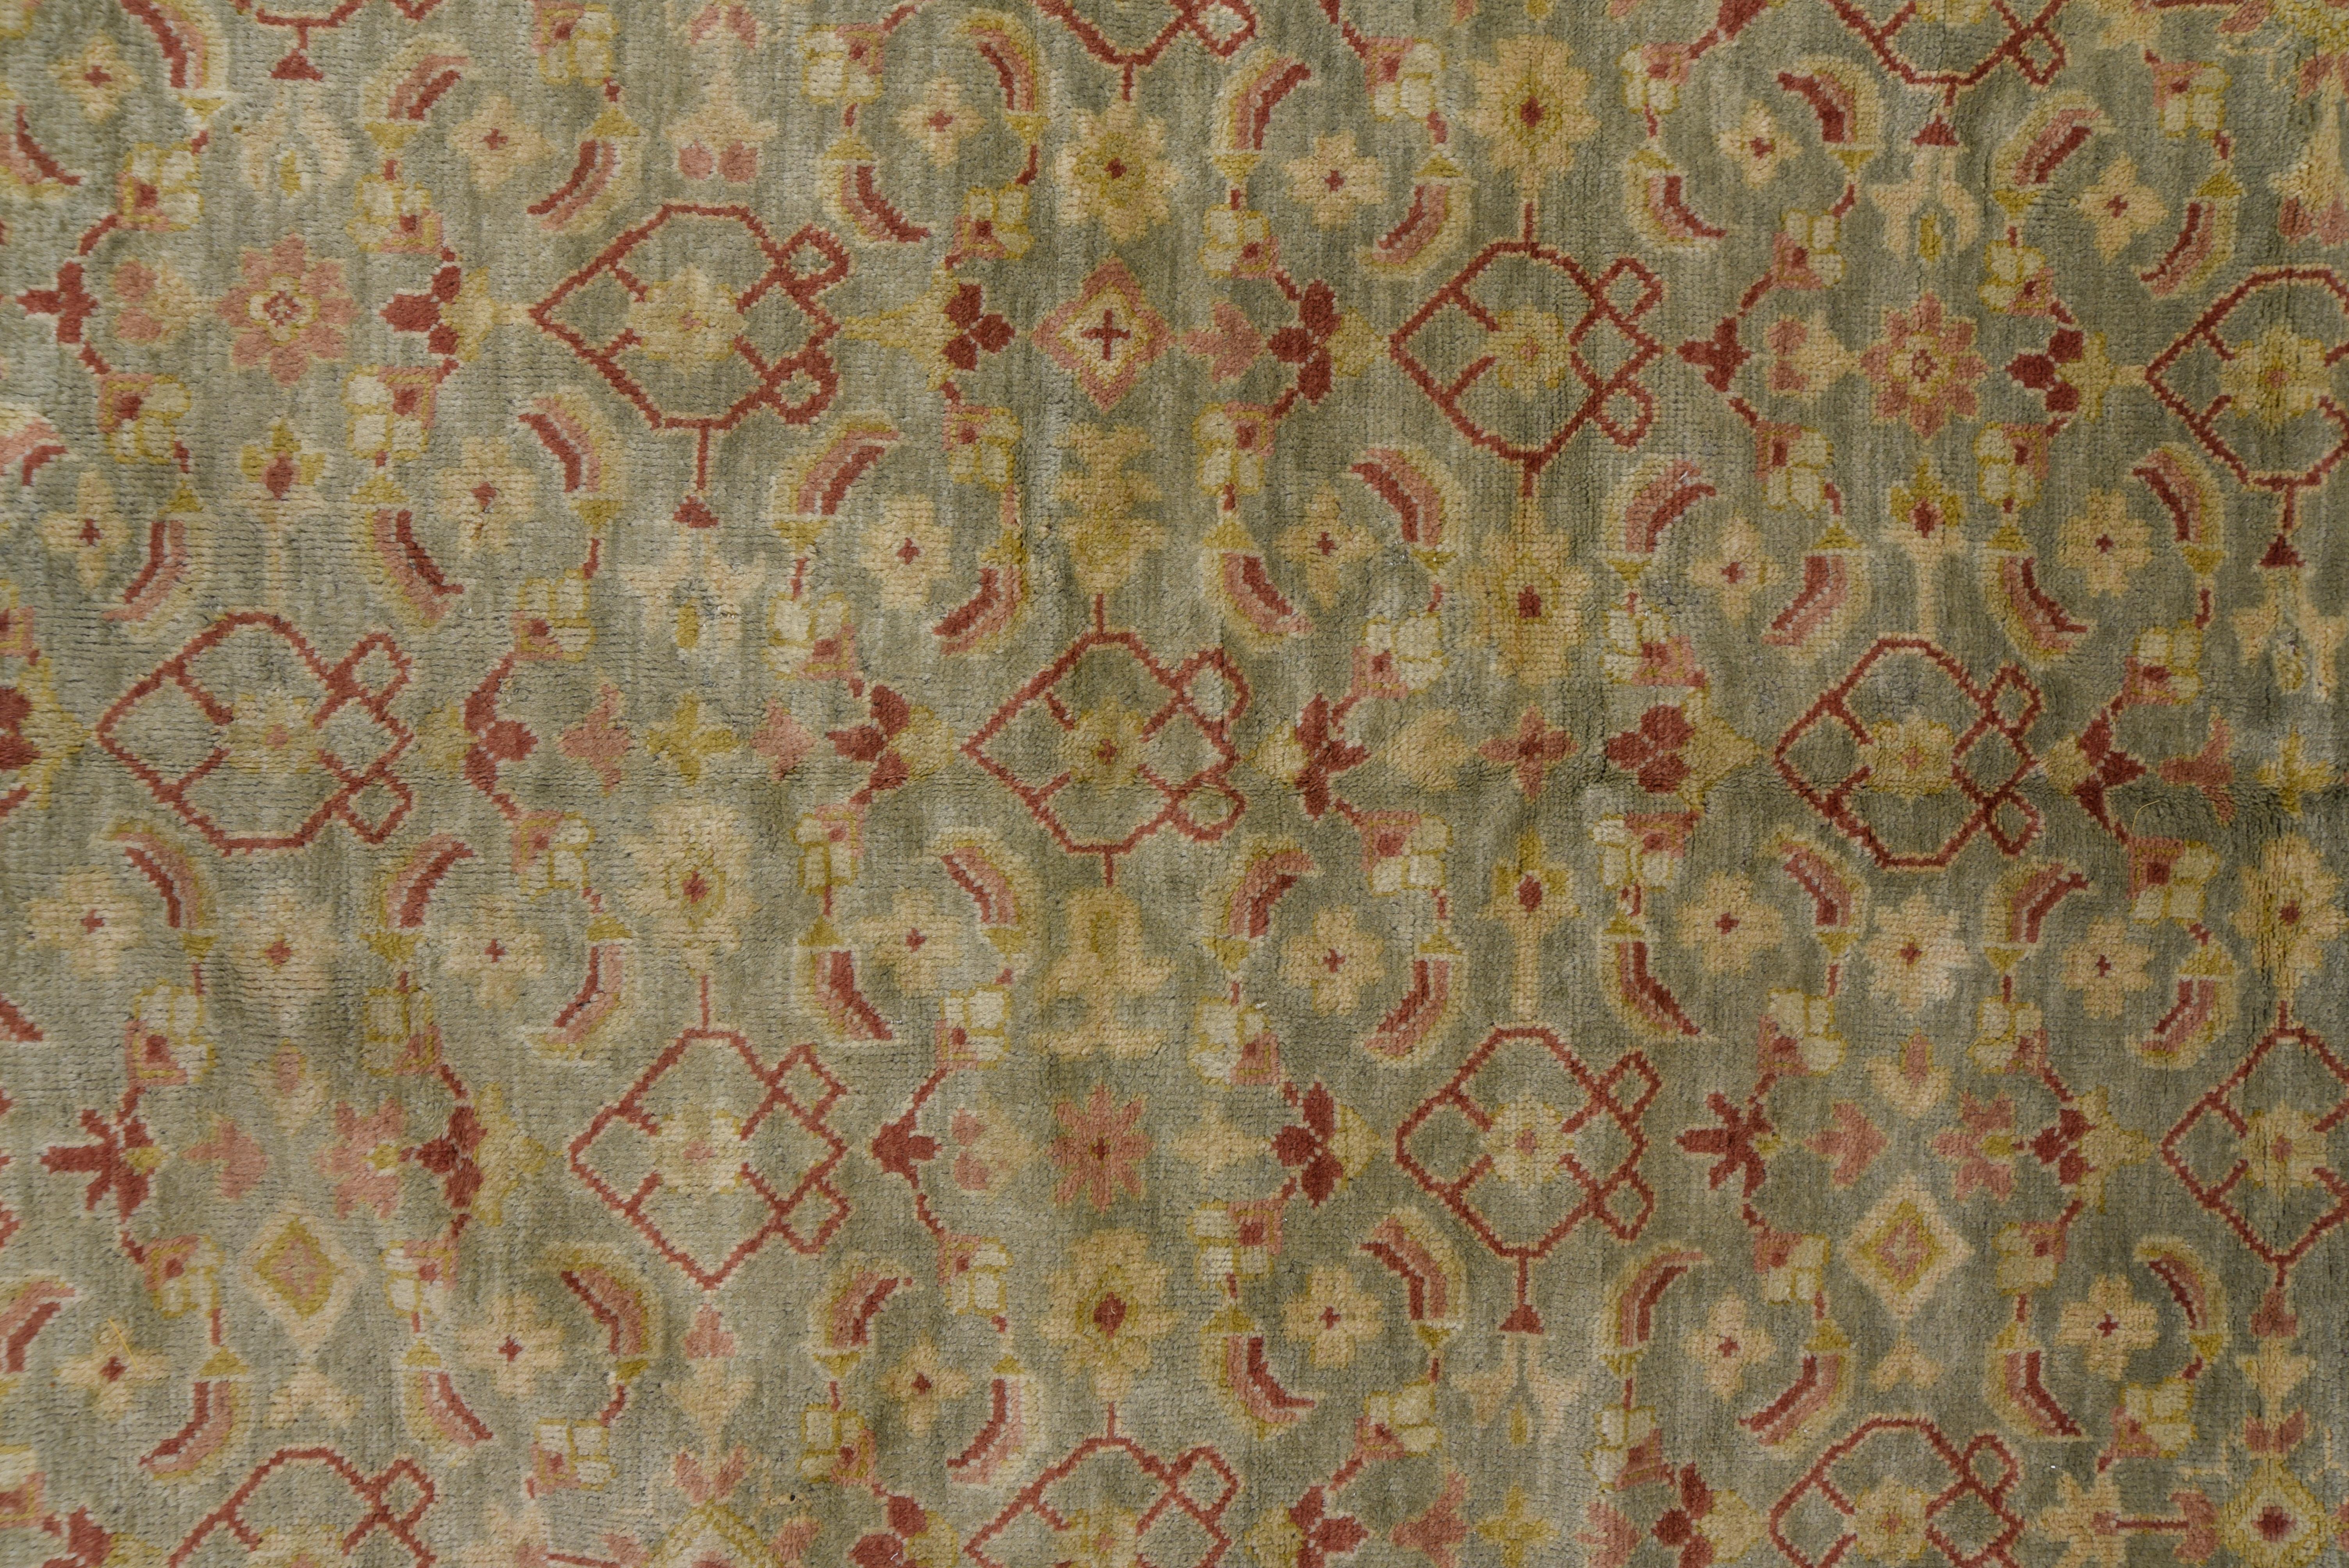 Contemporary Hand Knotted Indian Mahal Design Carpet, Seafoam Colored Field, Red Borders